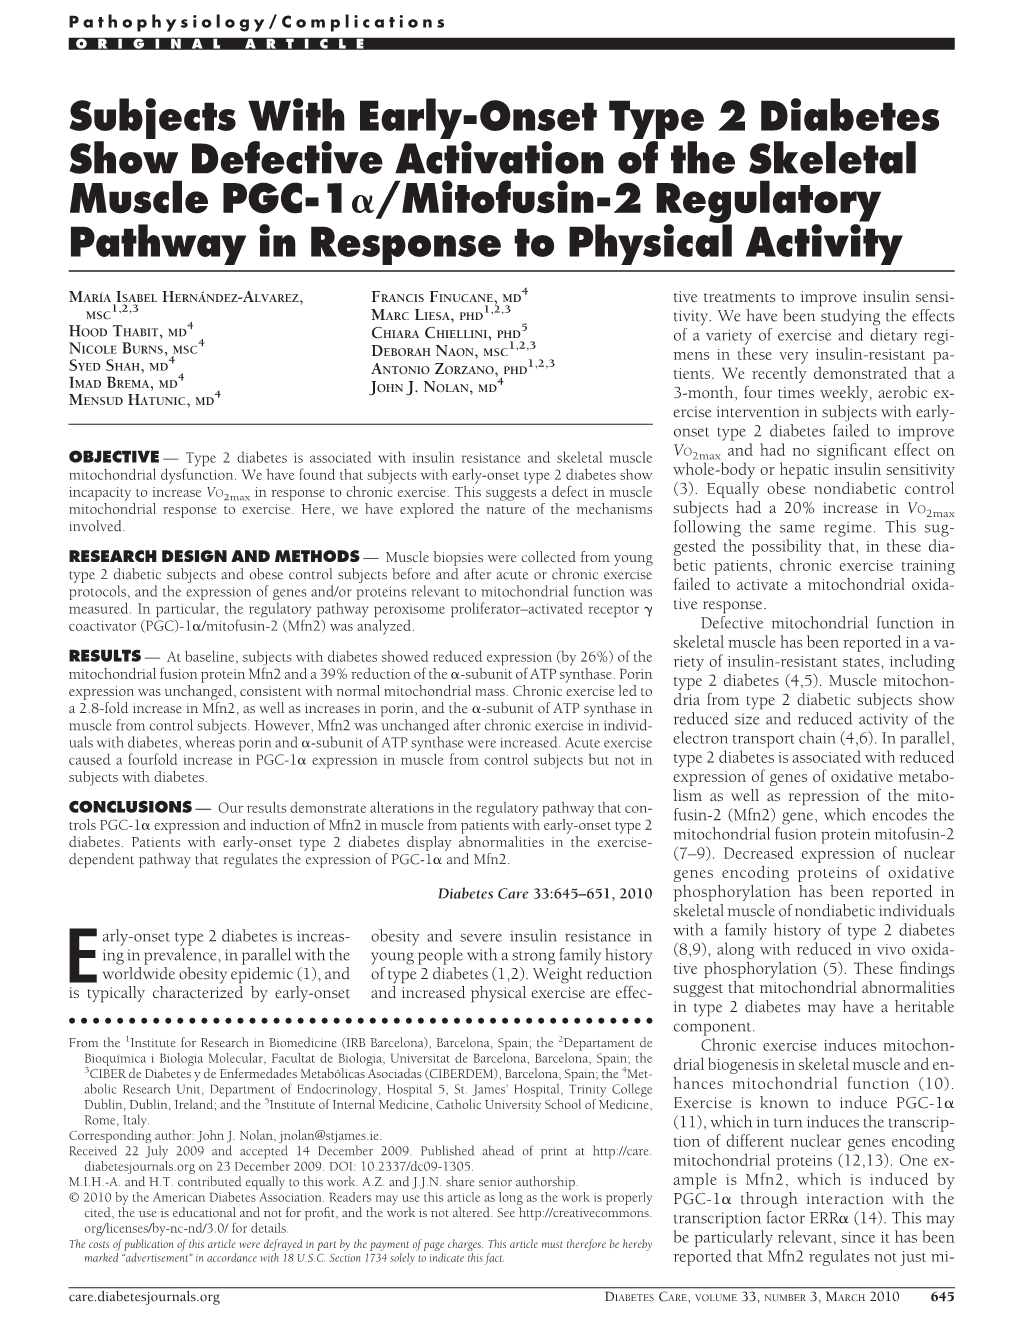 Subjects with Early-Onset Type 2 Diabetes Show Defective Activation of the Skeletal Muscle PGC-1␣/Mitofusin-2 Regulatory Pathway in Response to Physical Activity